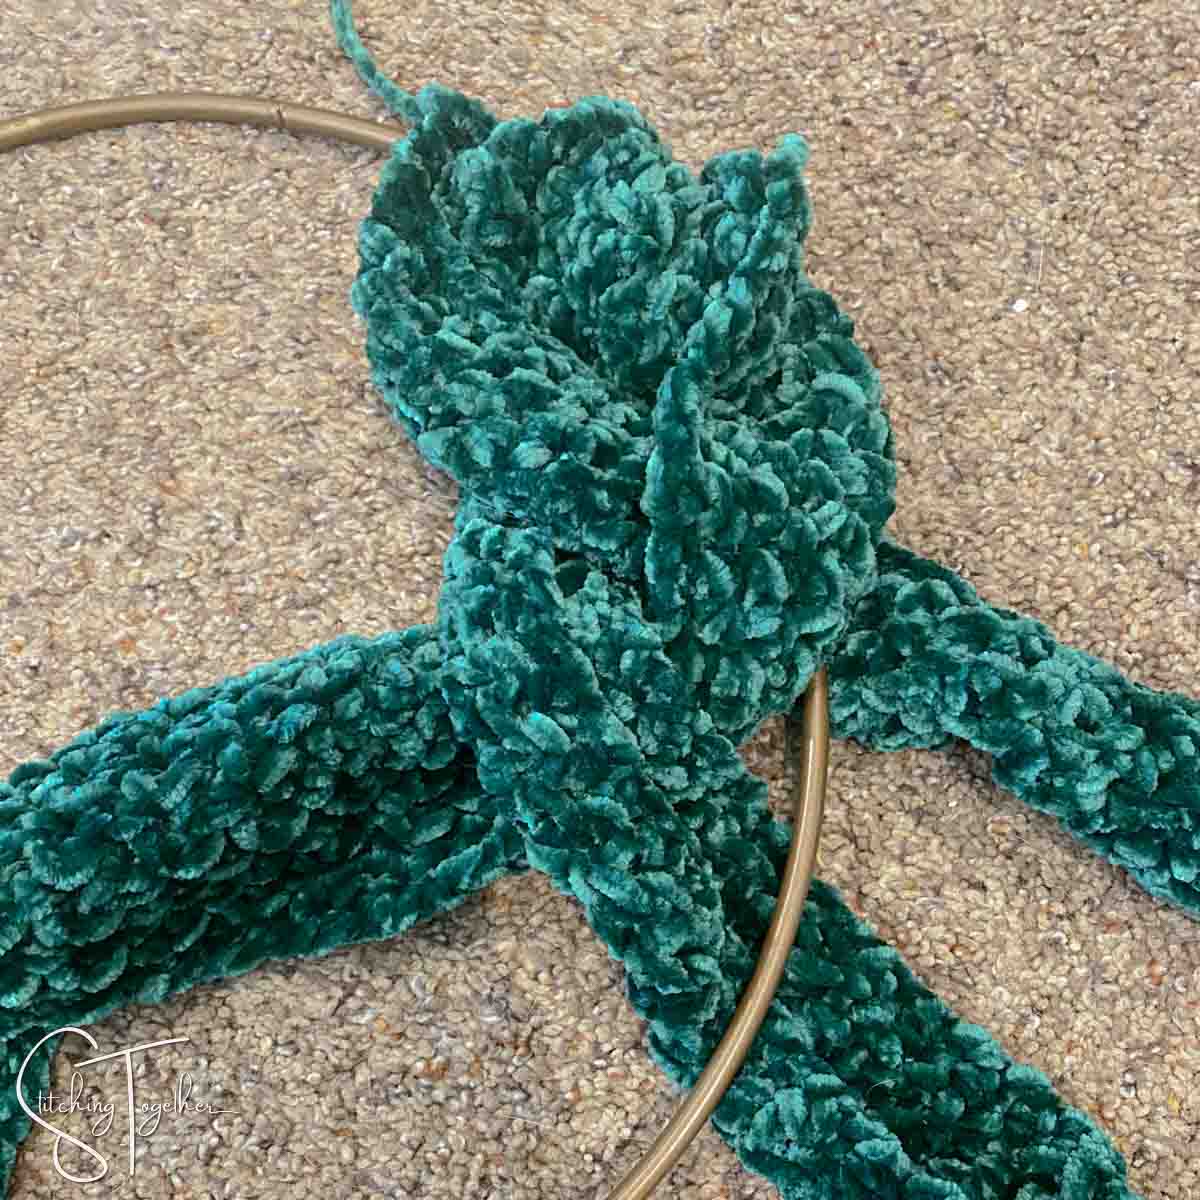 3 strips of green crochet fabric being braided around a metal hoop